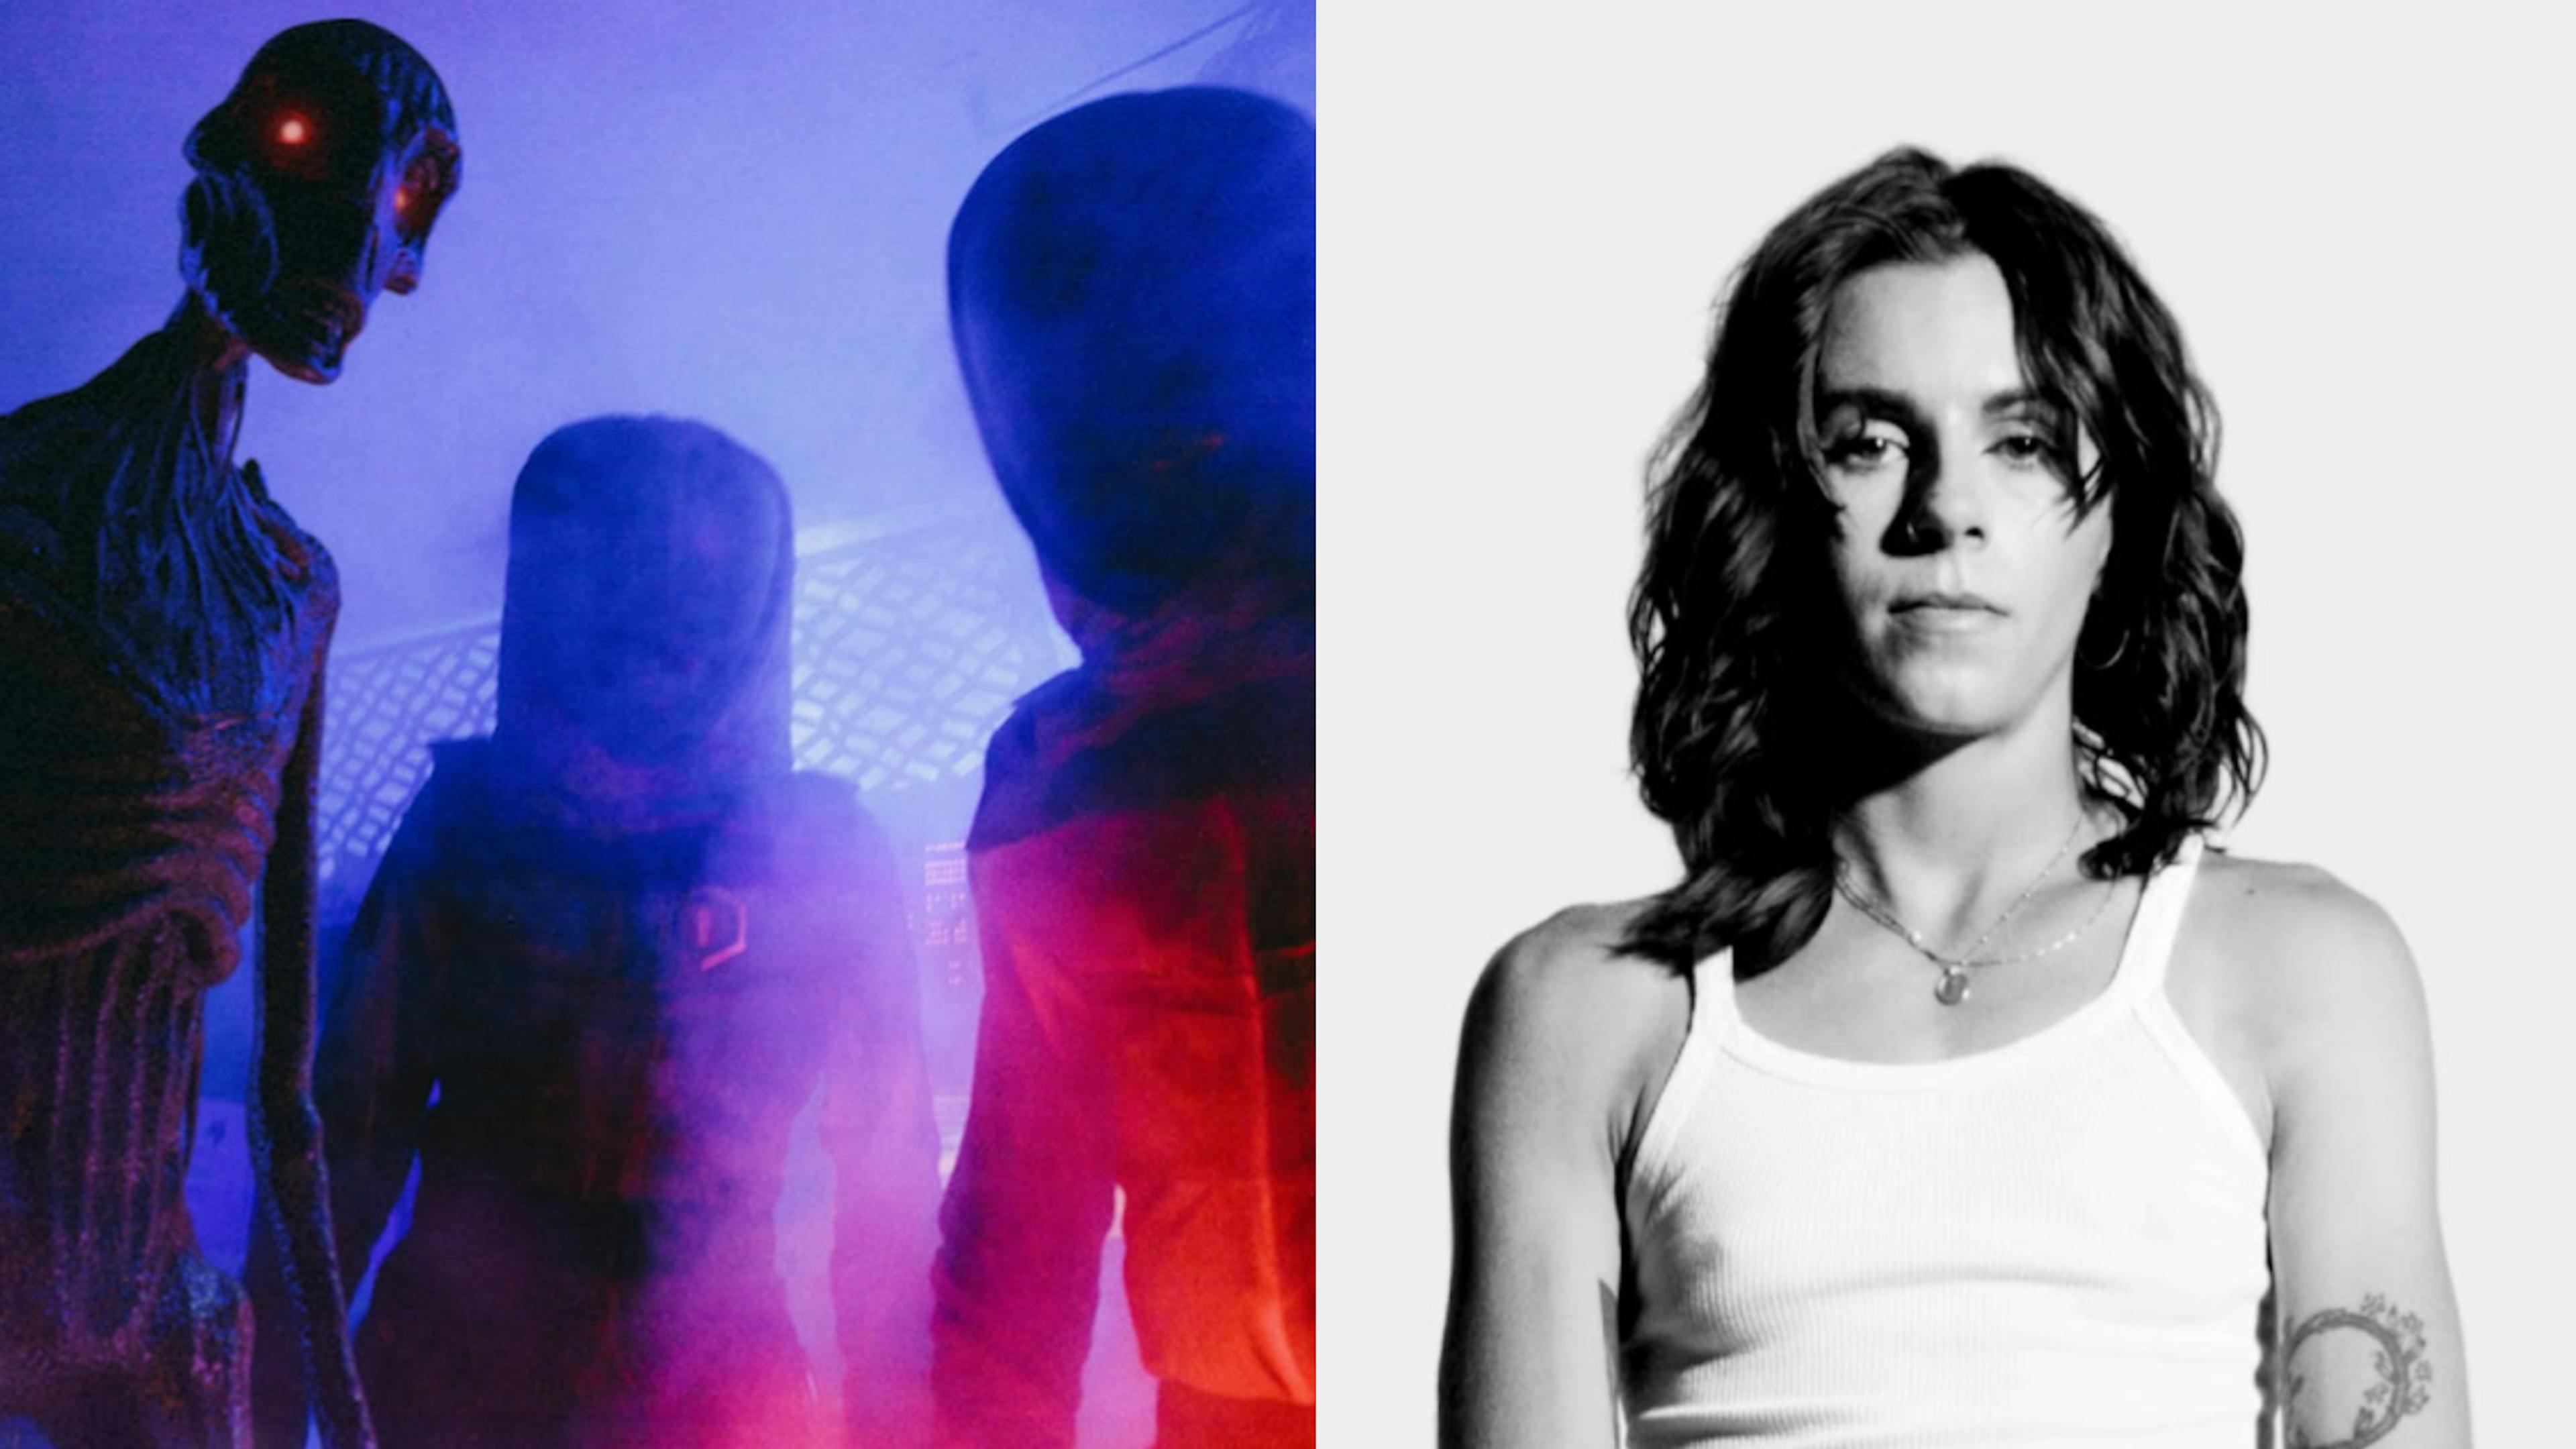 PVRIS and MILKBLOOD team up for glitchy alt-pop single Wicked